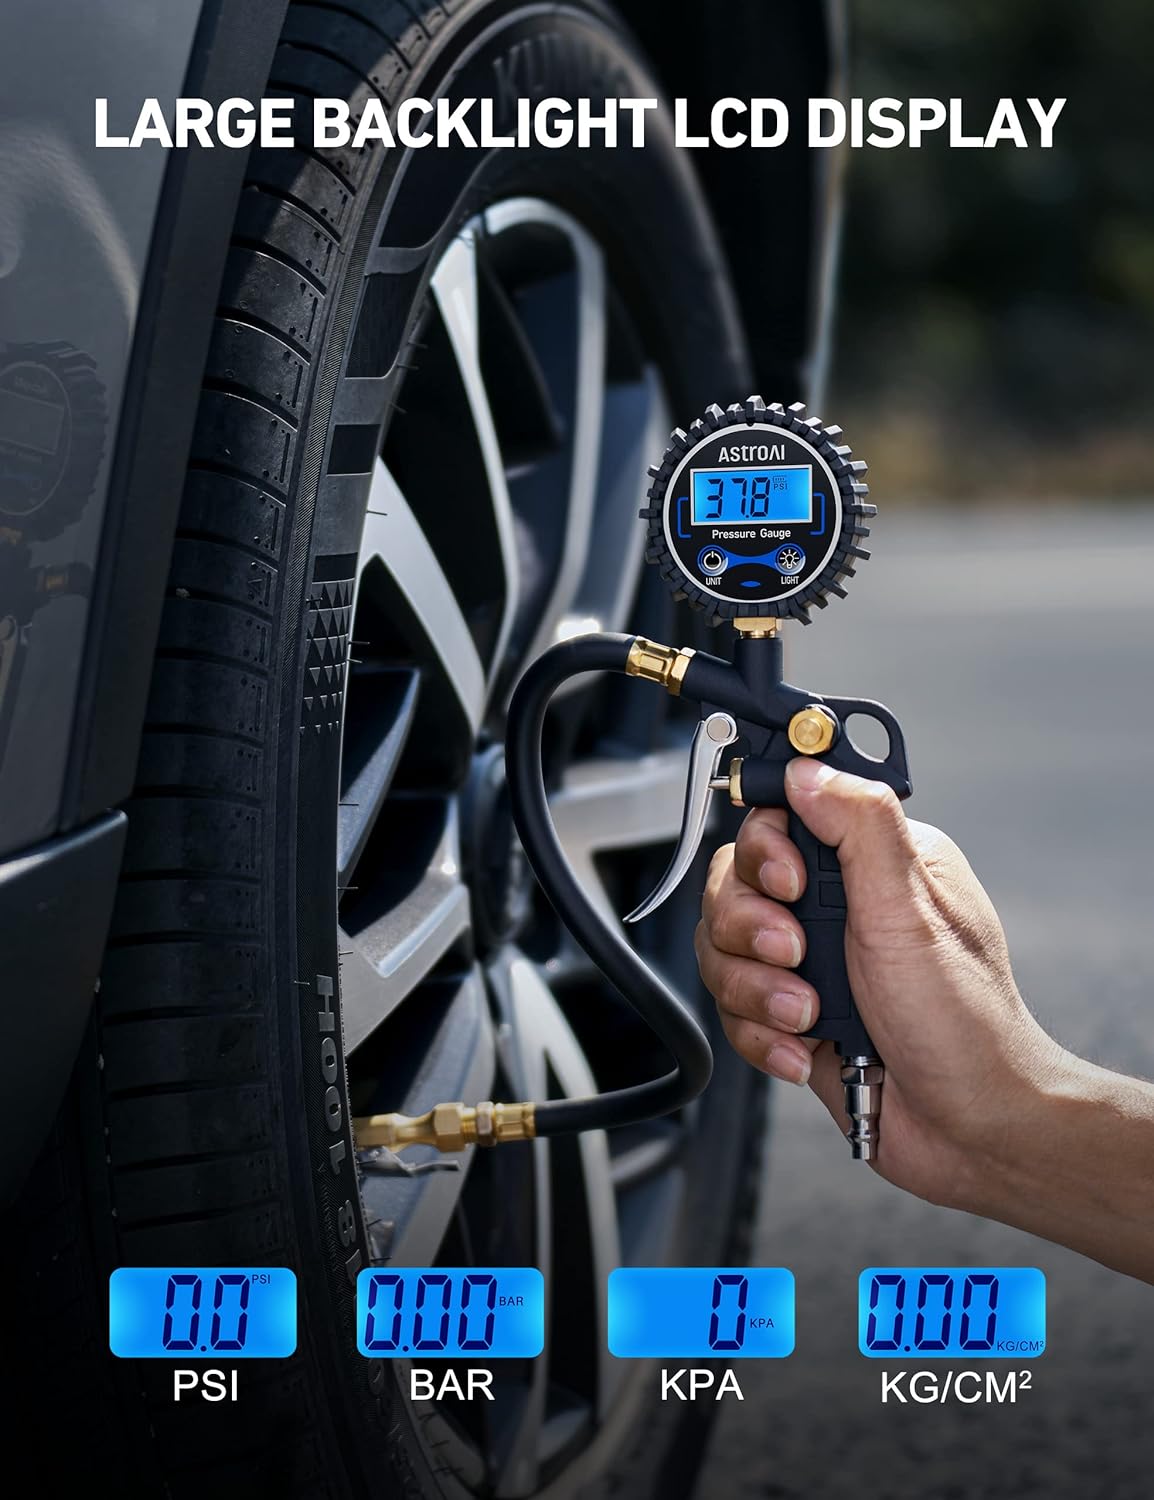 AstroAI Digital Tire Pressure Gauge with Inflator, 250 PSI Air Chuck & Compressor Accessories Heavy Duty with Quick Connect Coupler, 0.1 Display Resolution, Car Accessories & Stocking Stuffers for Men